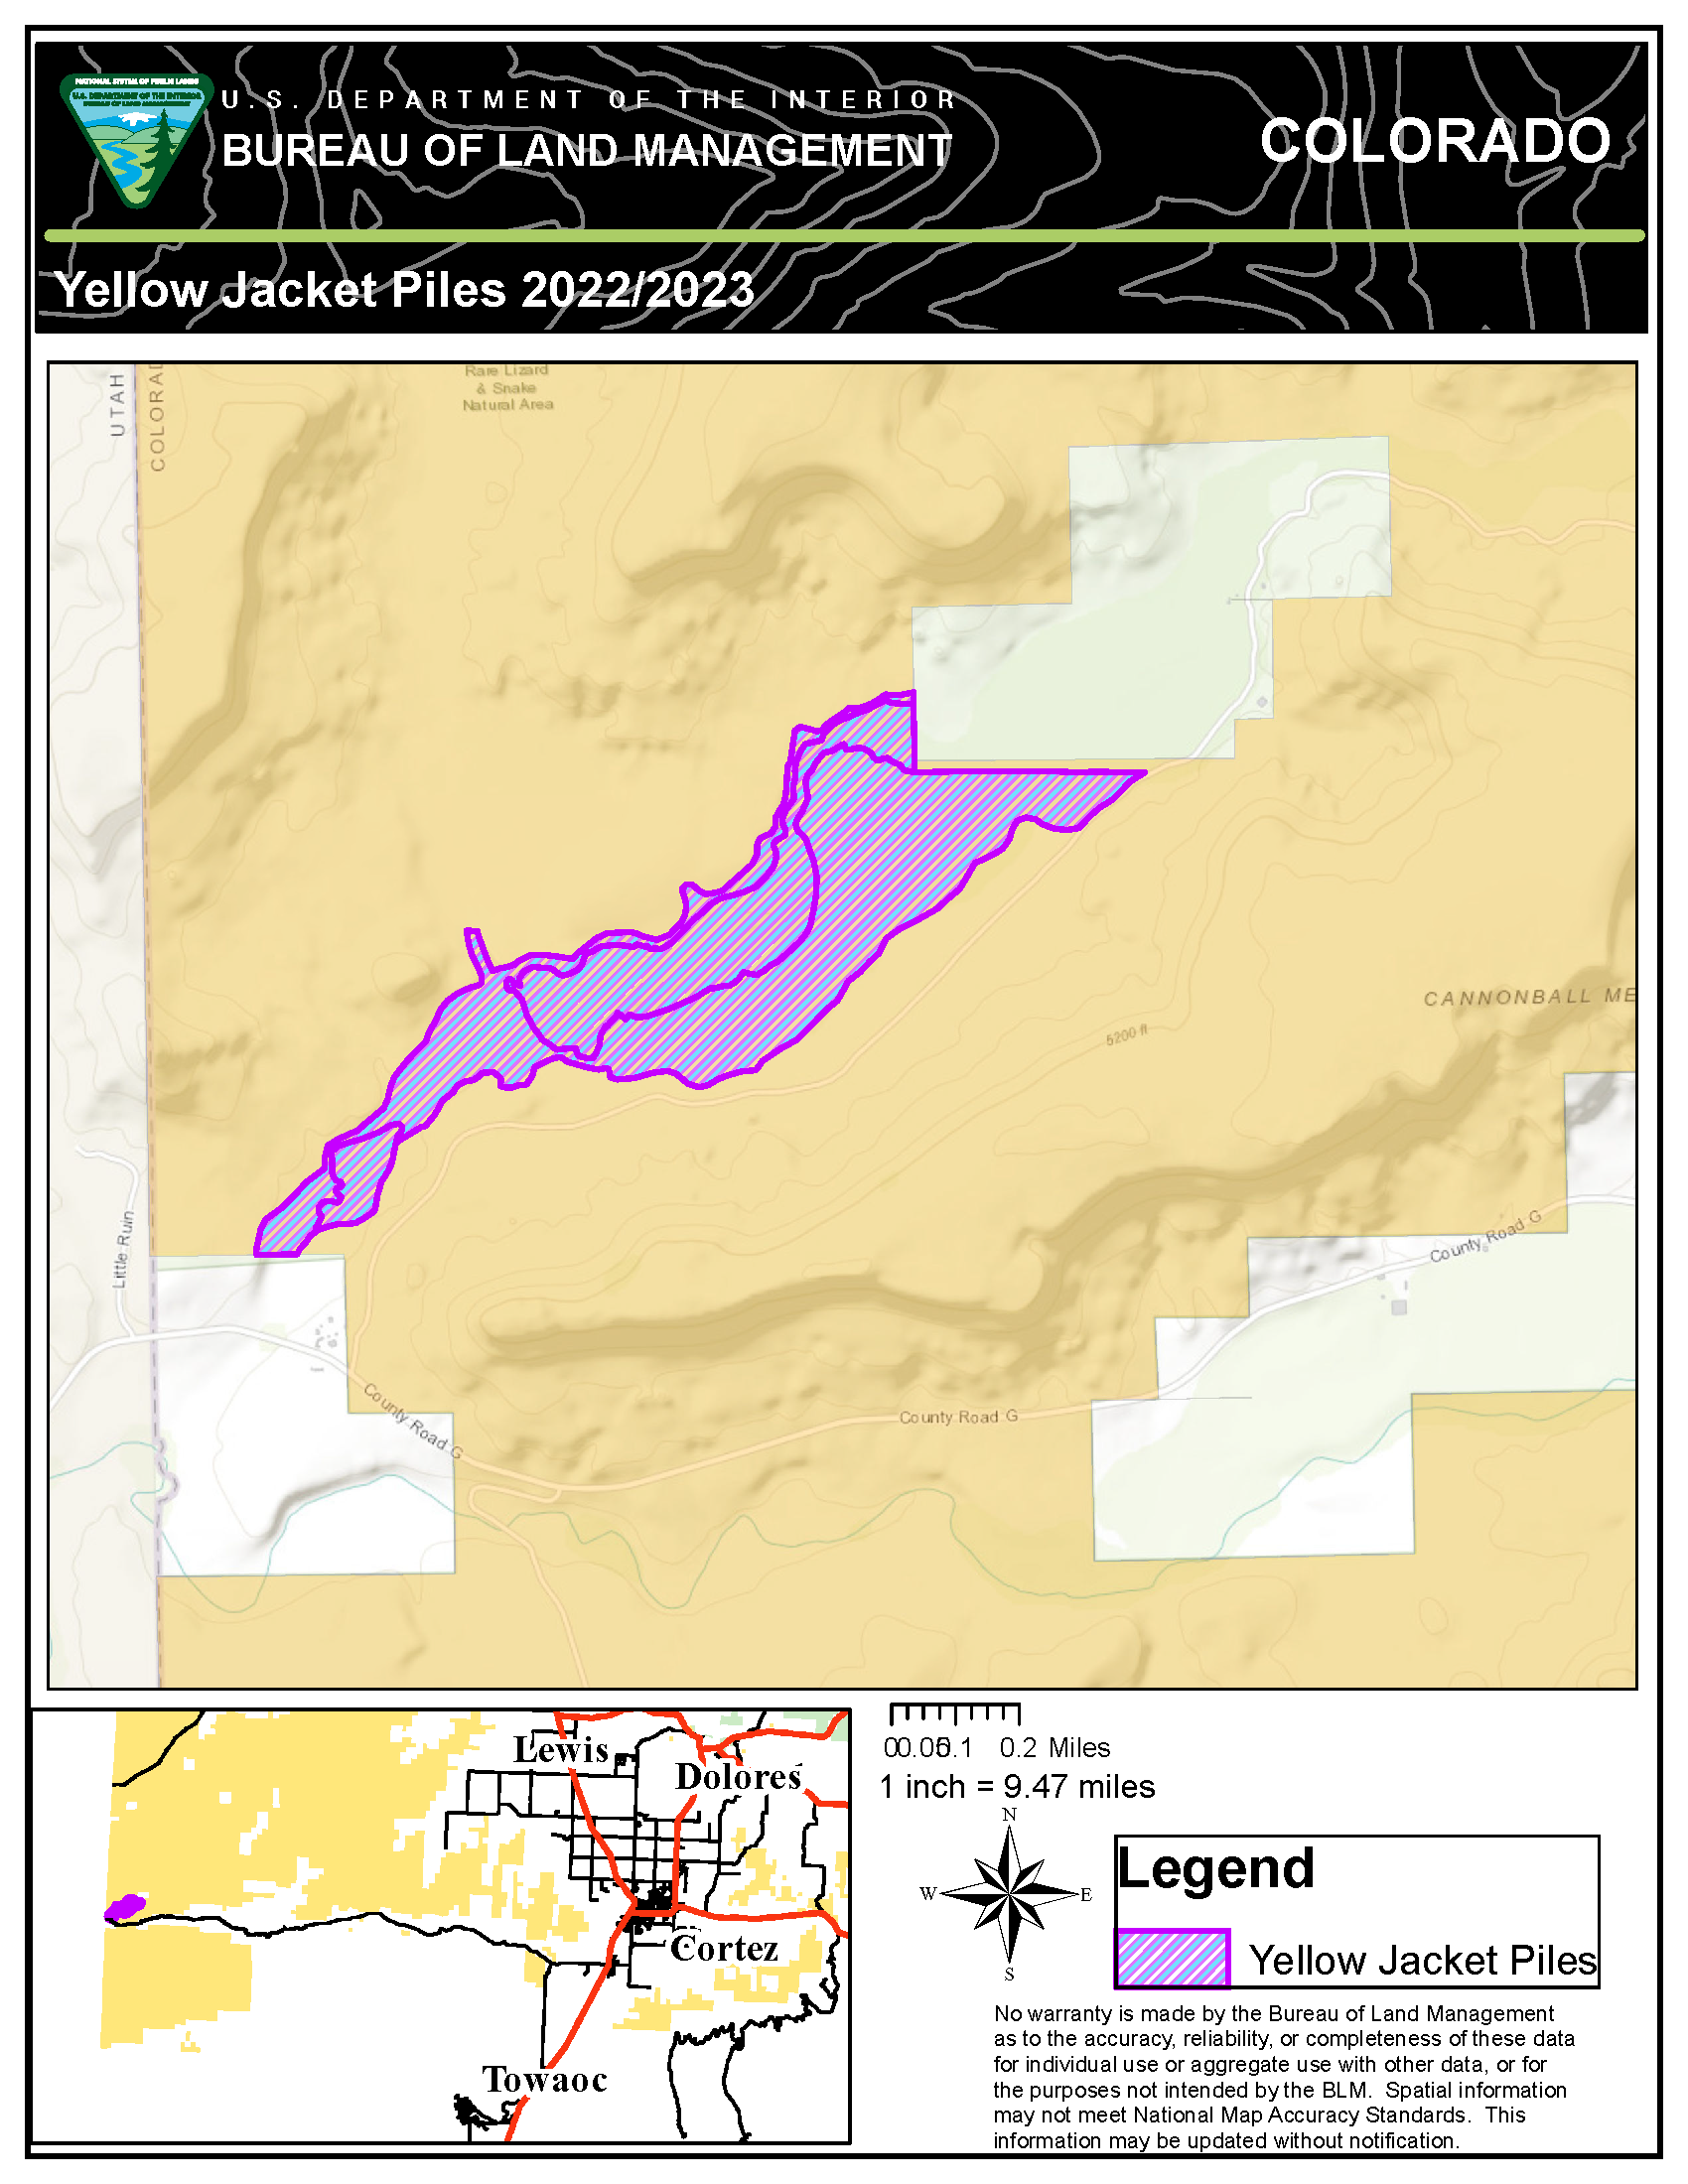 Yellow Jacket Pile RX Map 2022-2023